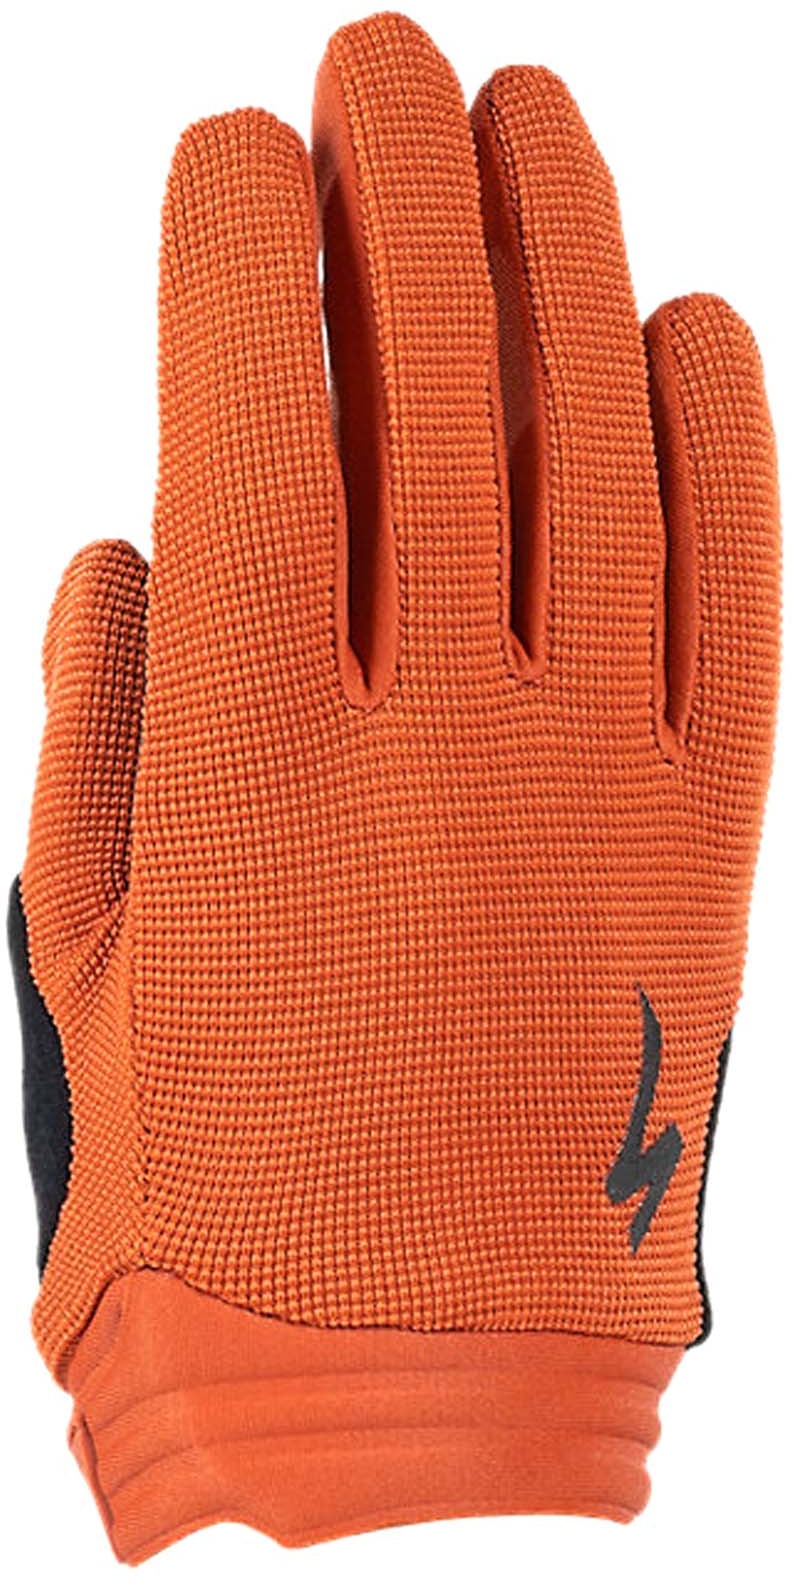 Specialized Youth Trail Handschuhe langfinger | redwood - Youth S